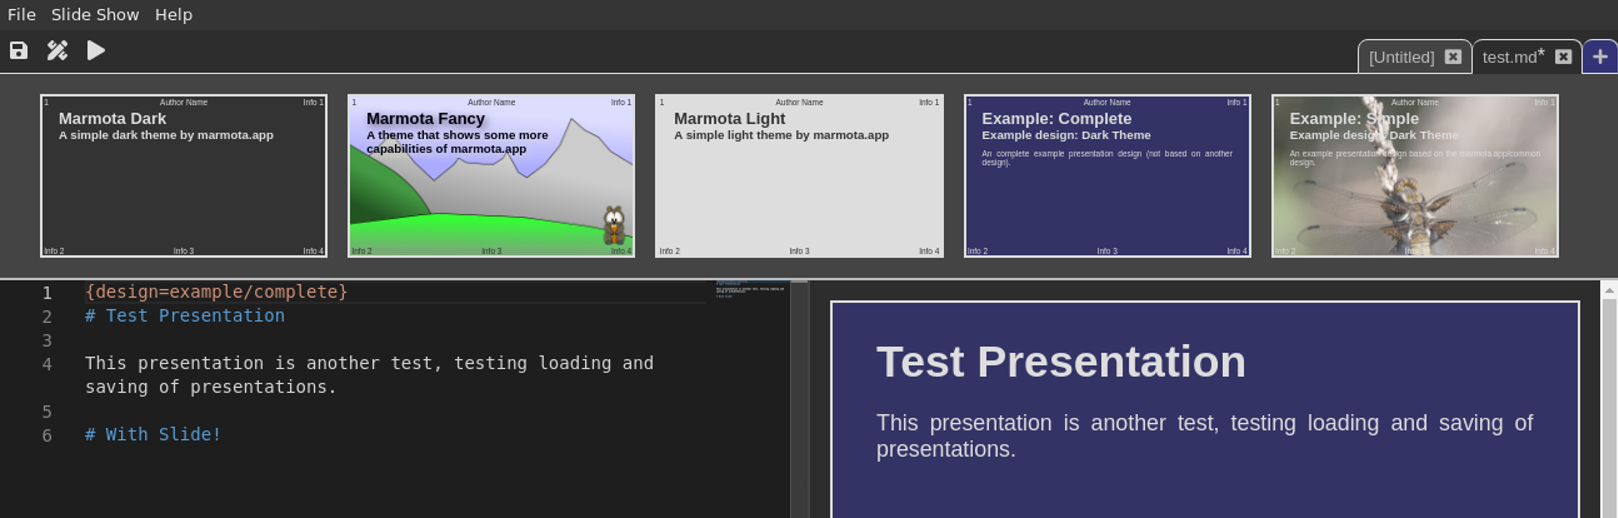 Screenshot: Selecting example designs that were stored with the presentation